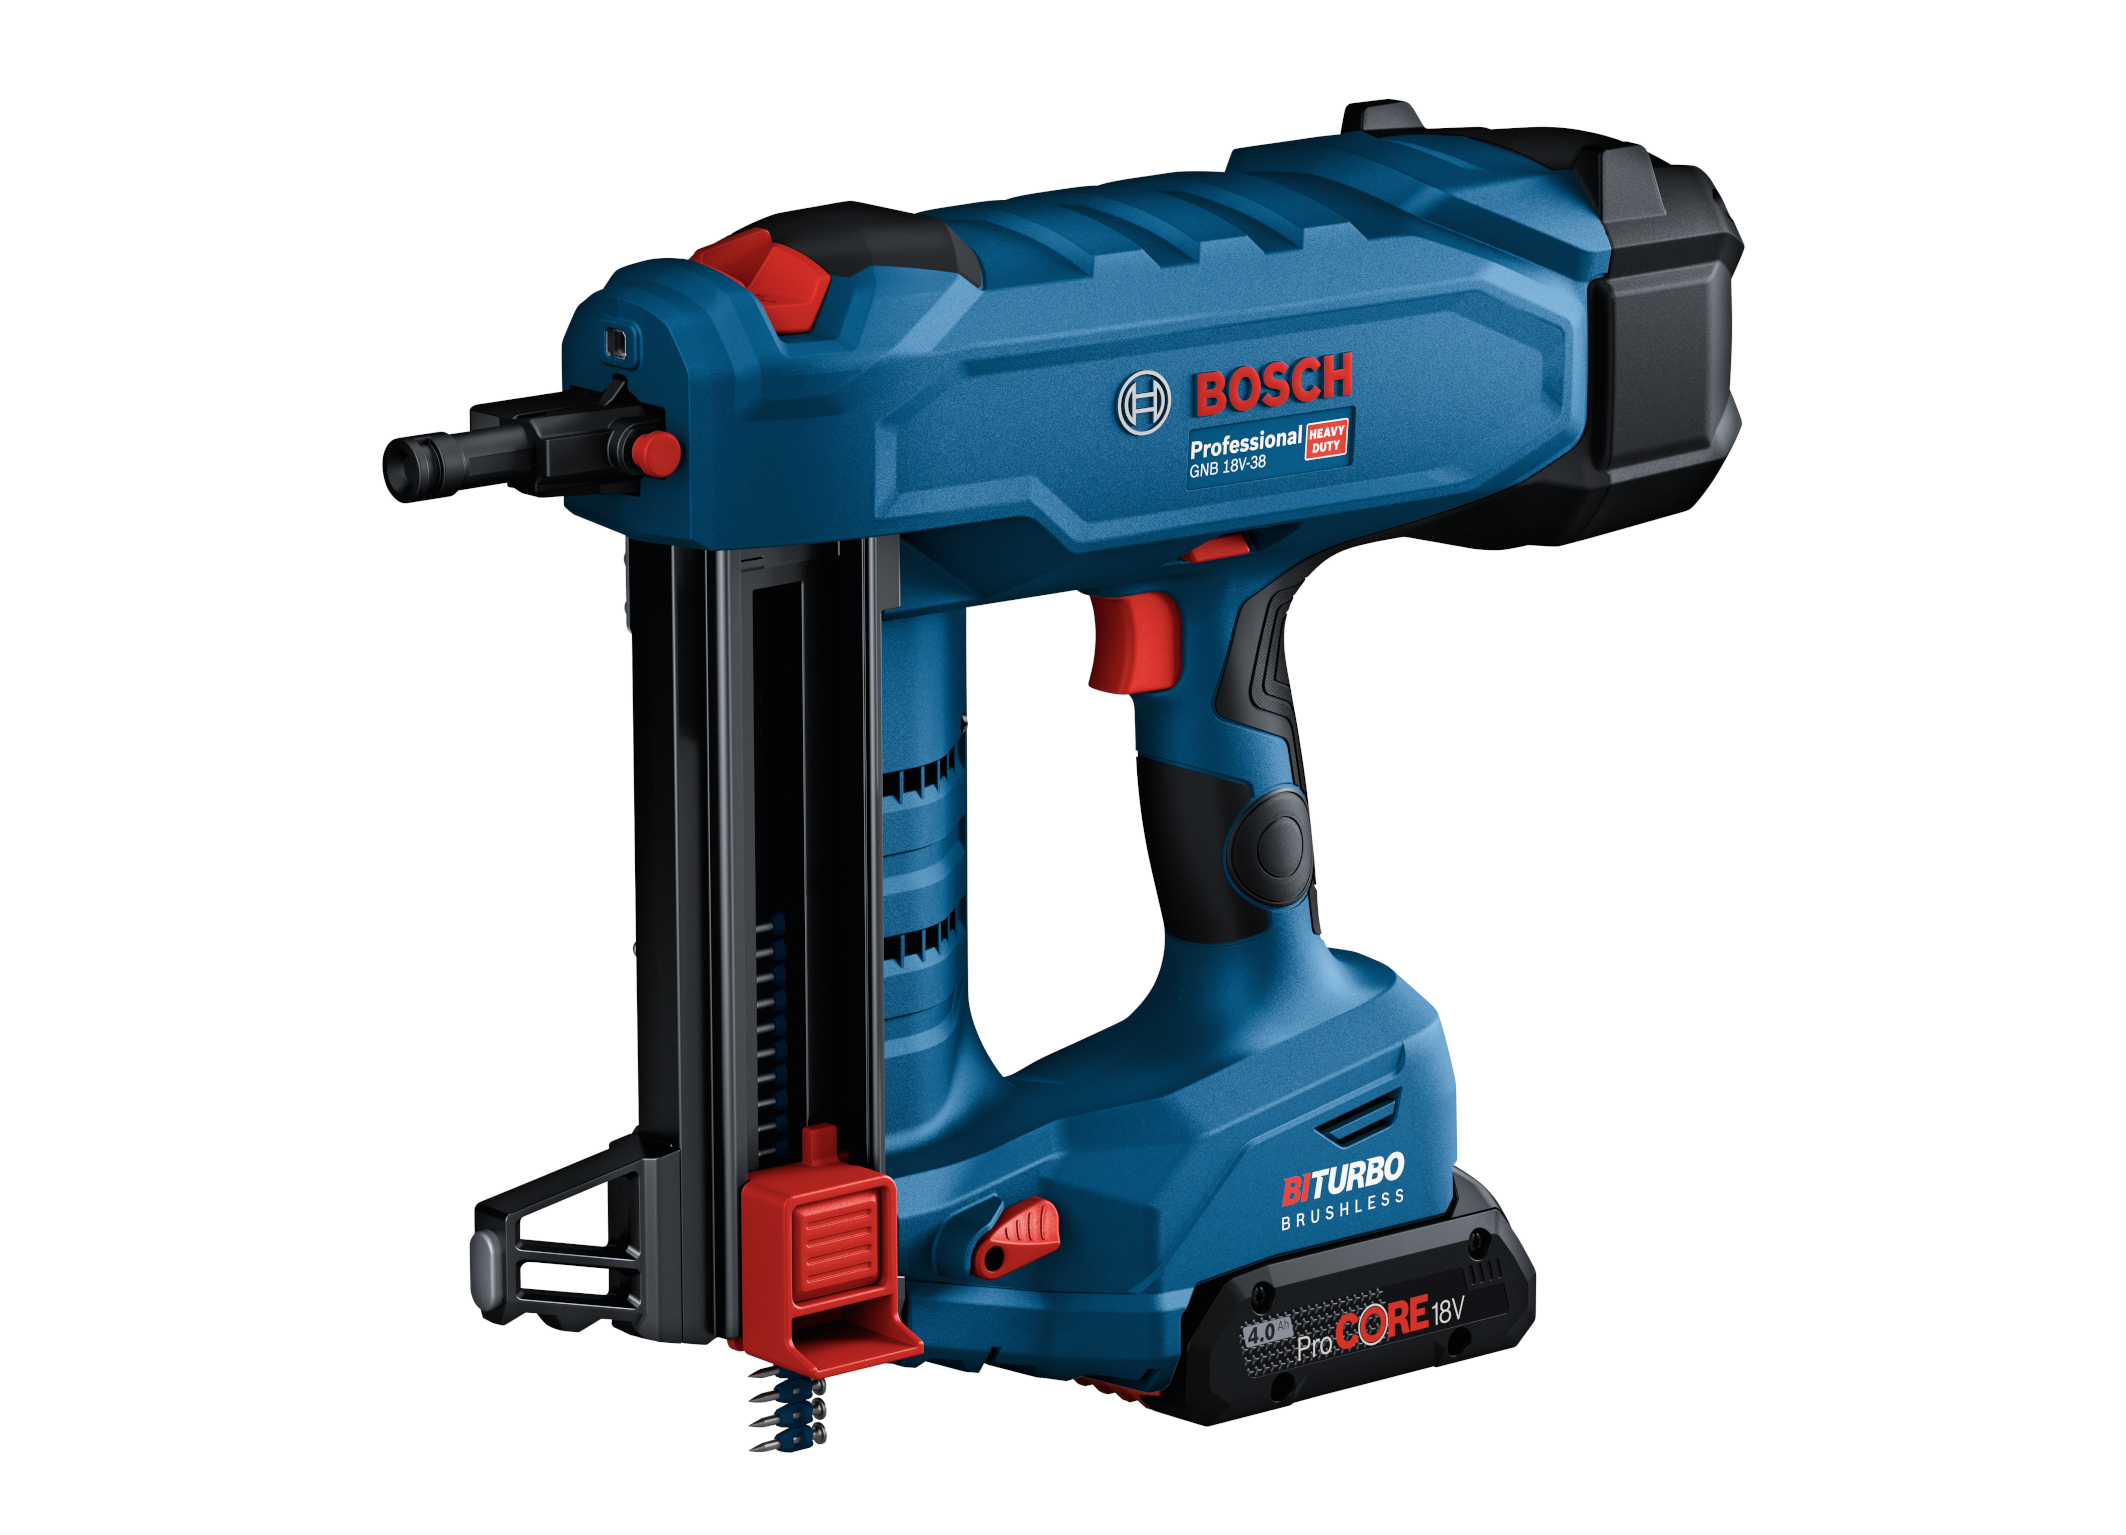 New to the Professional 18V System: First professional cordless concrete nailer from Bosch